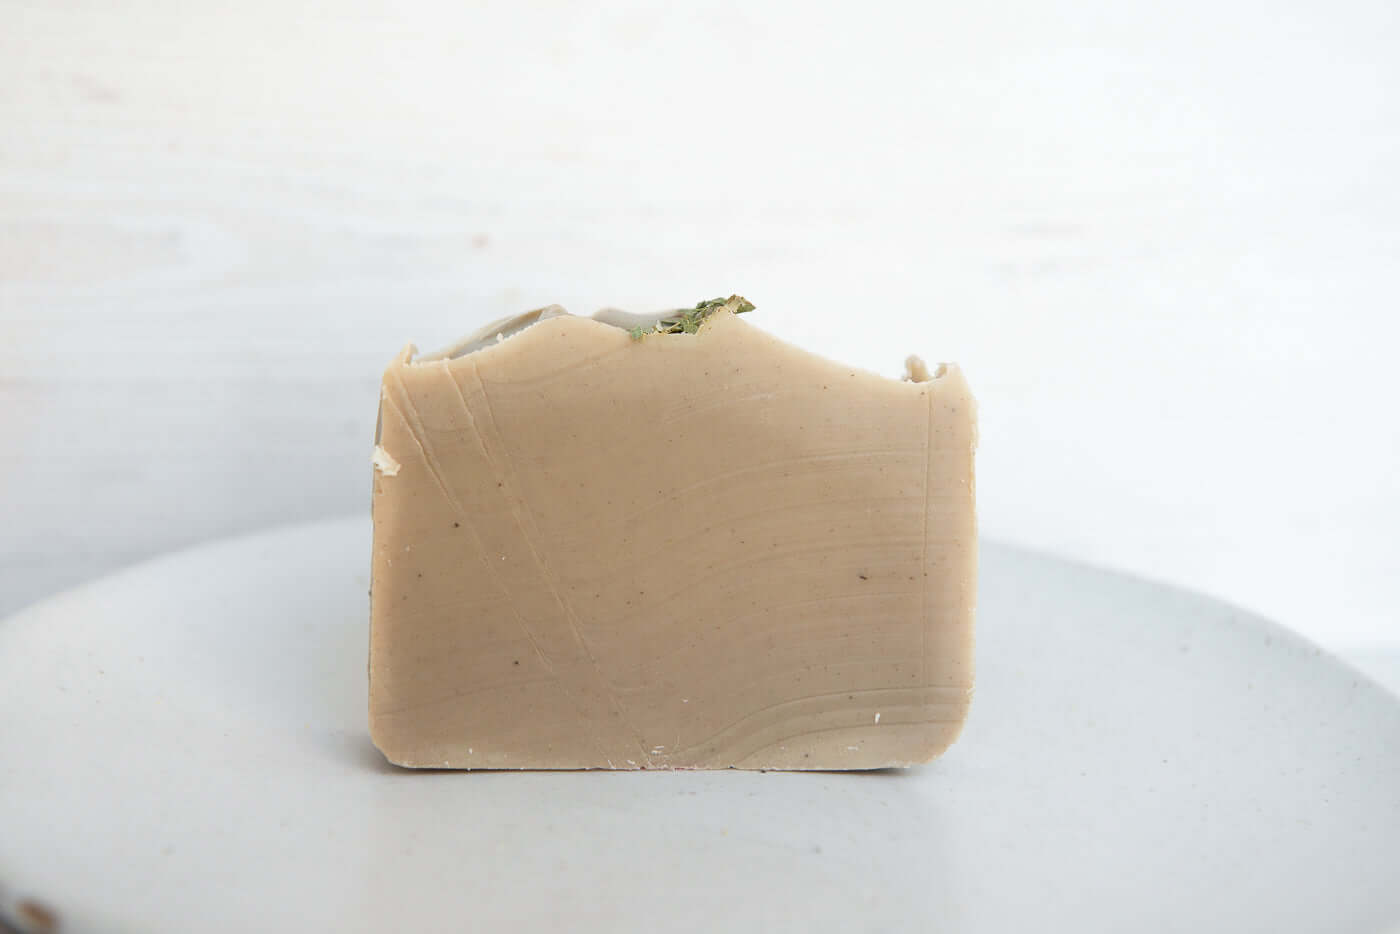 This handmade natural soap with  Mountain Eucalyptus & Australian Green Clay Soap deeply nourishes your skin